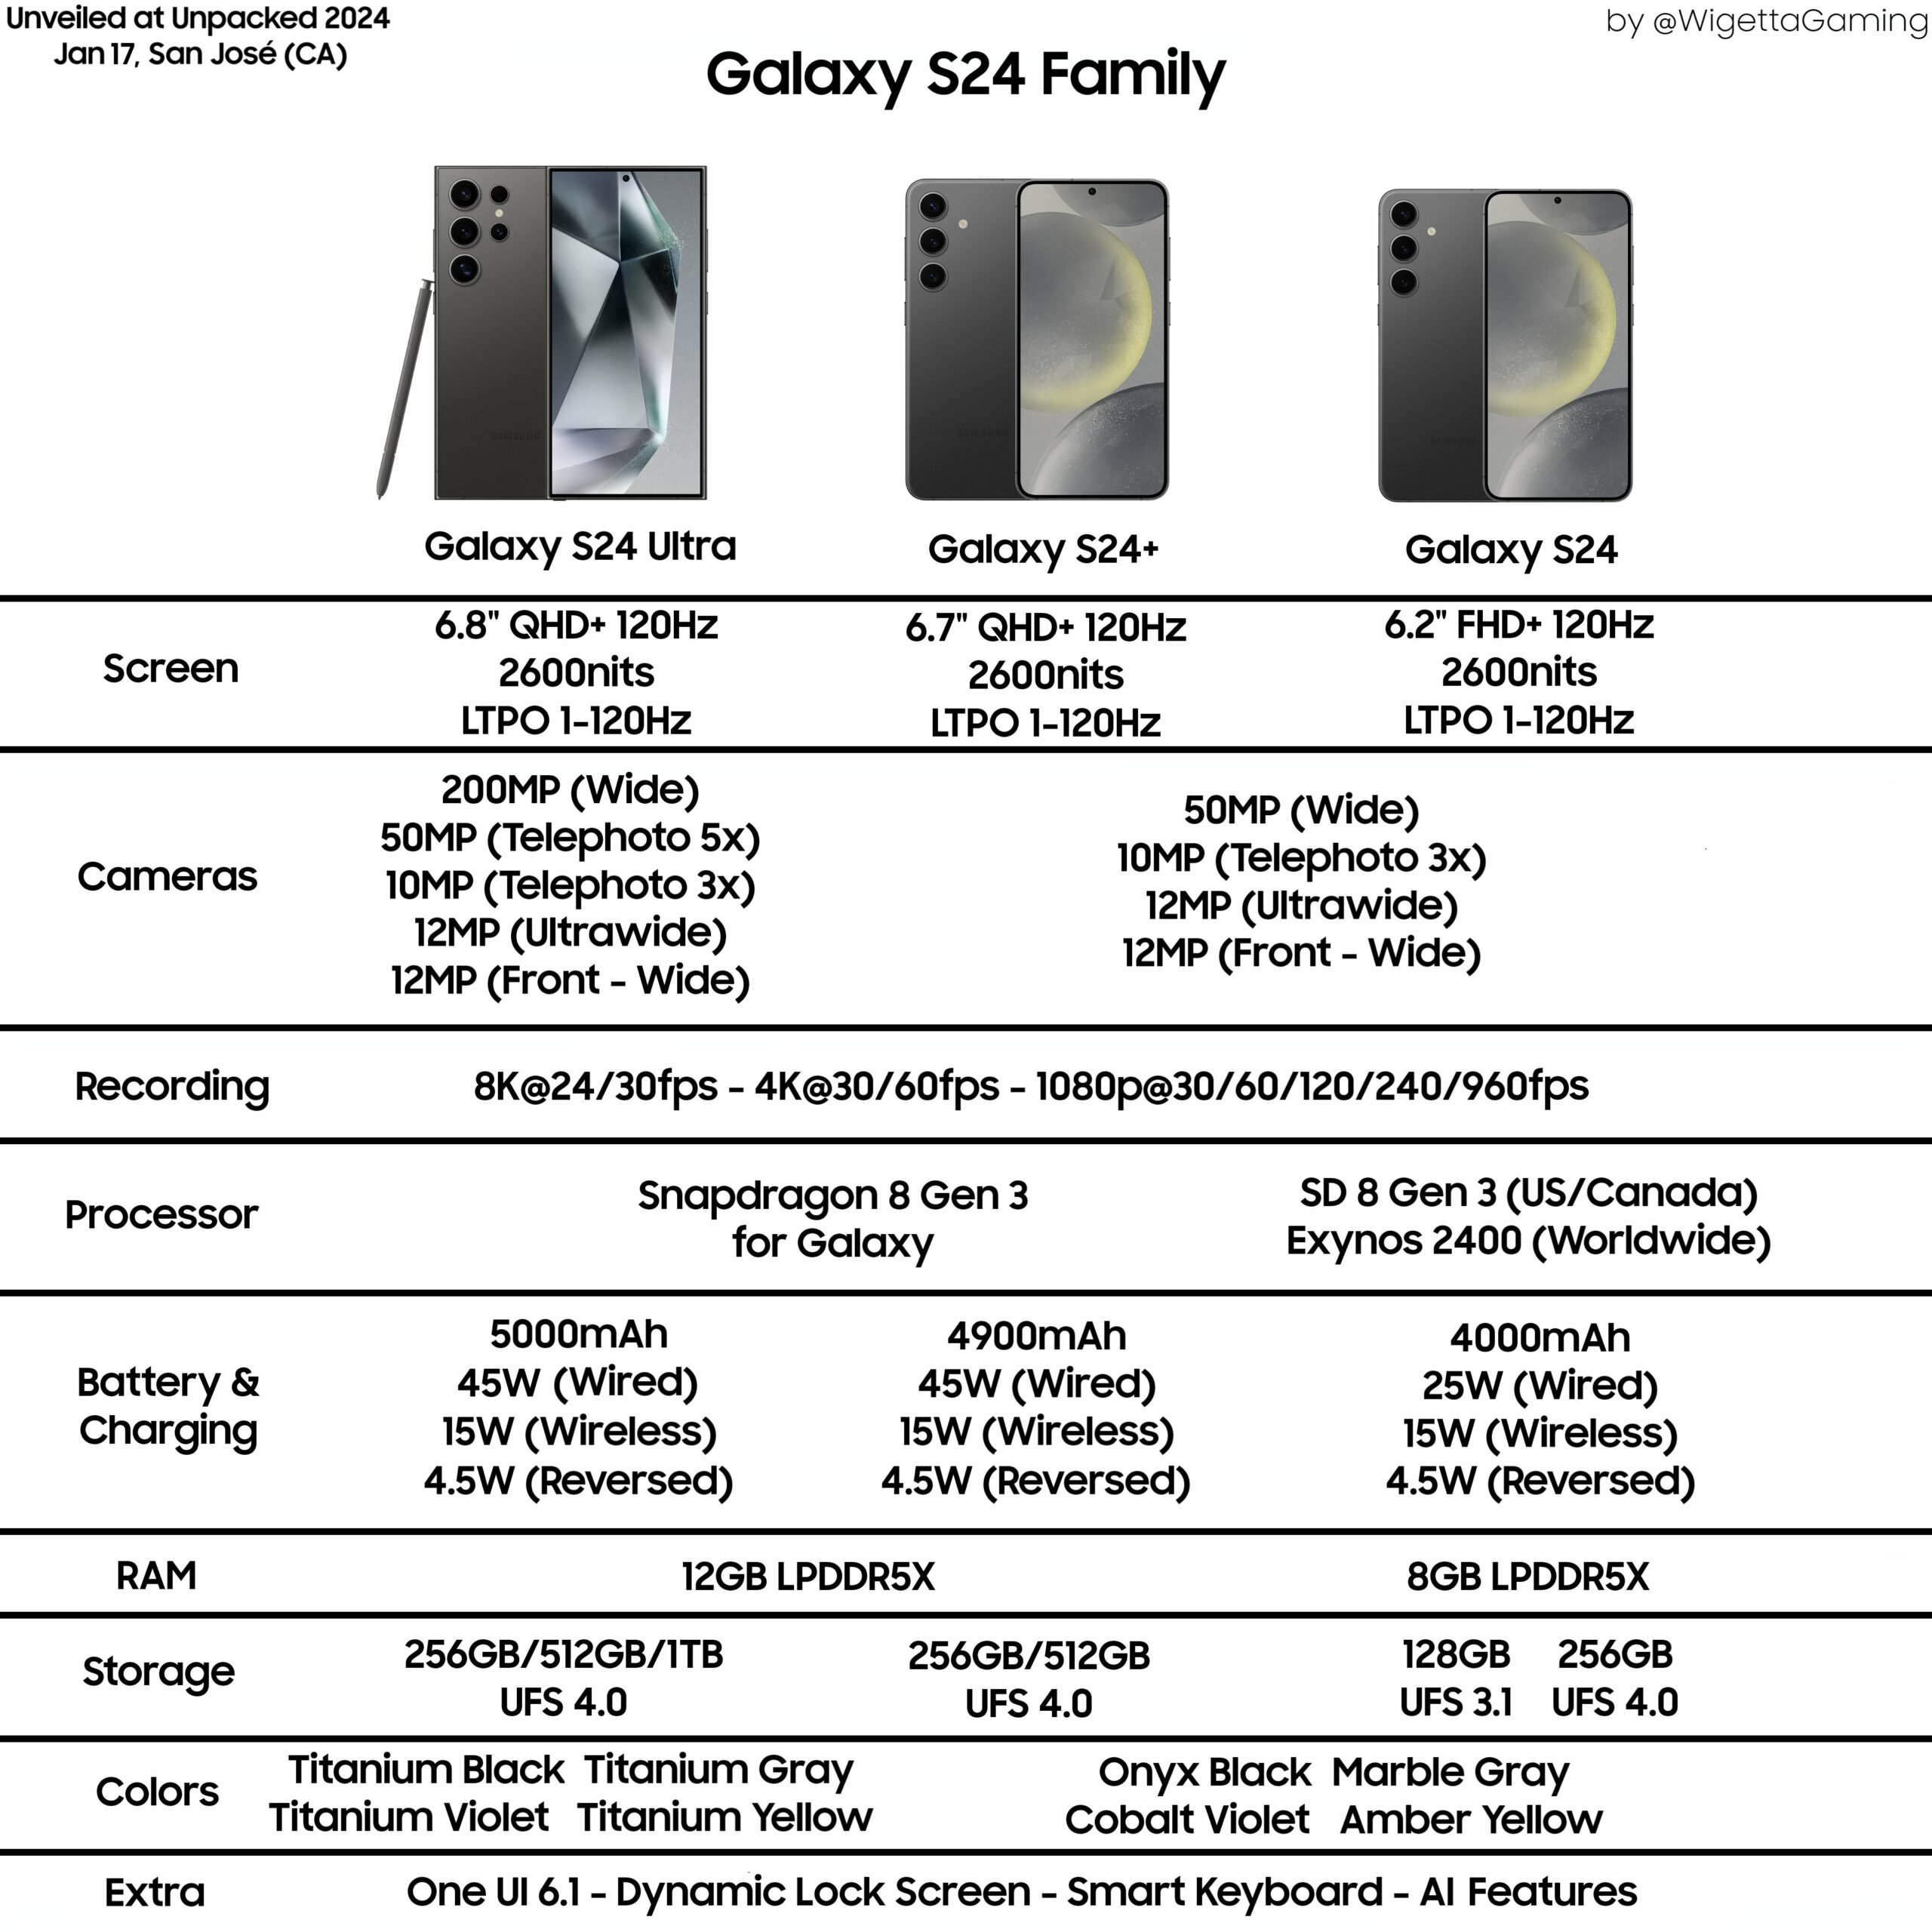 New leak reveals Samsung Galaxy S24 specifications list, launch date -  SamMobile